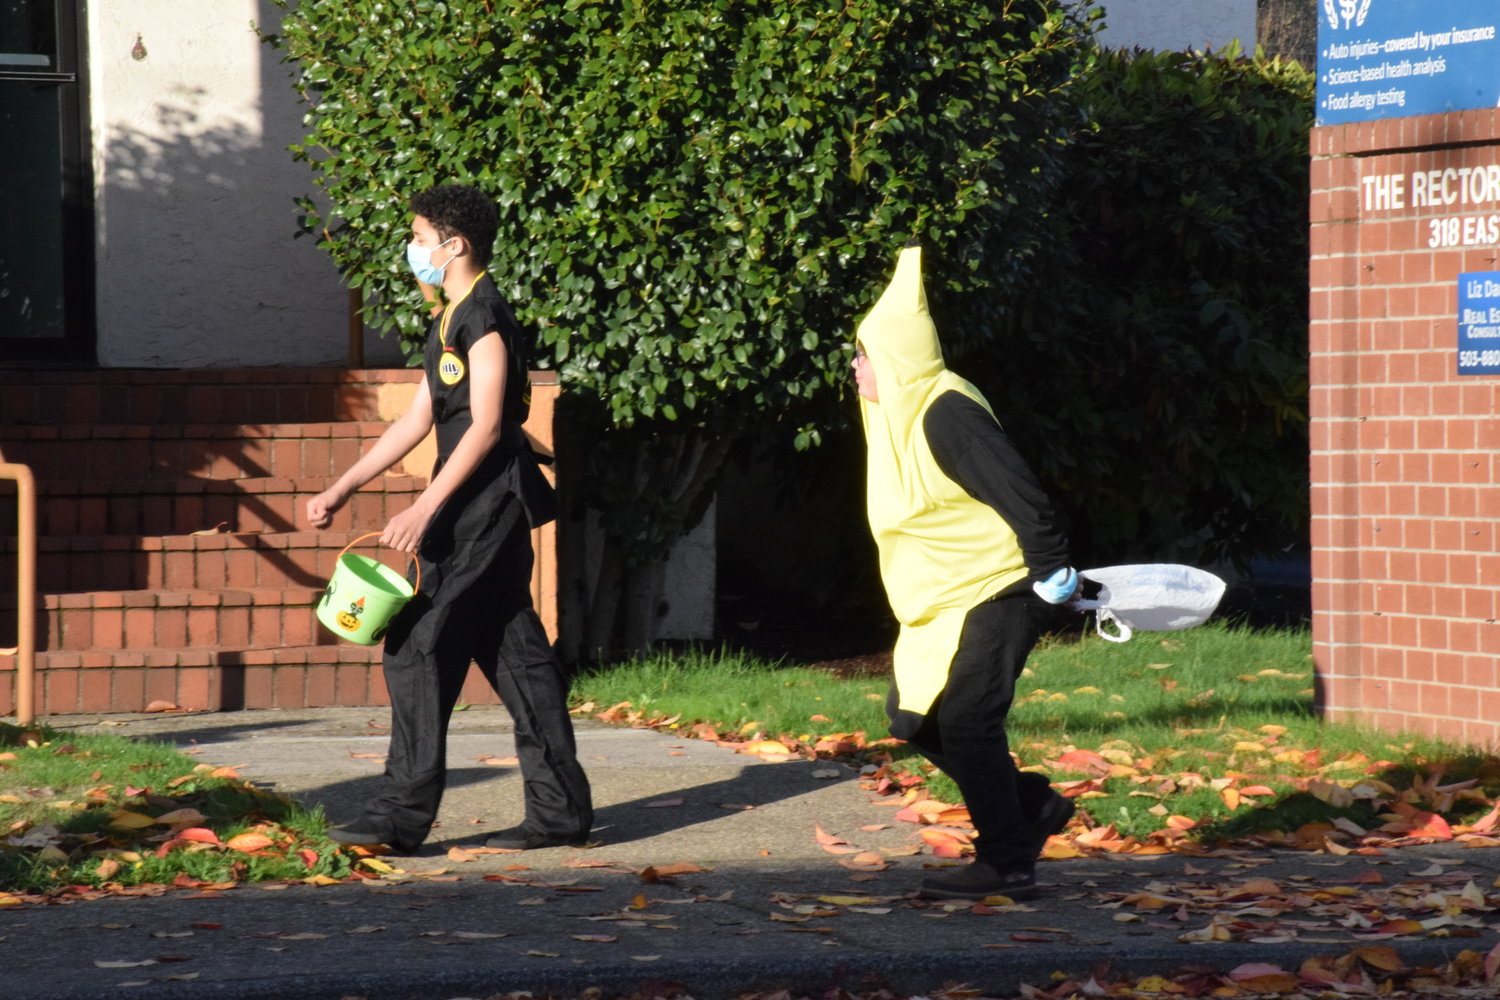 A martial artist and anthropomorphic banana head to the next business located on Main Street during the city’s annual Halloween event on Oct. 29.